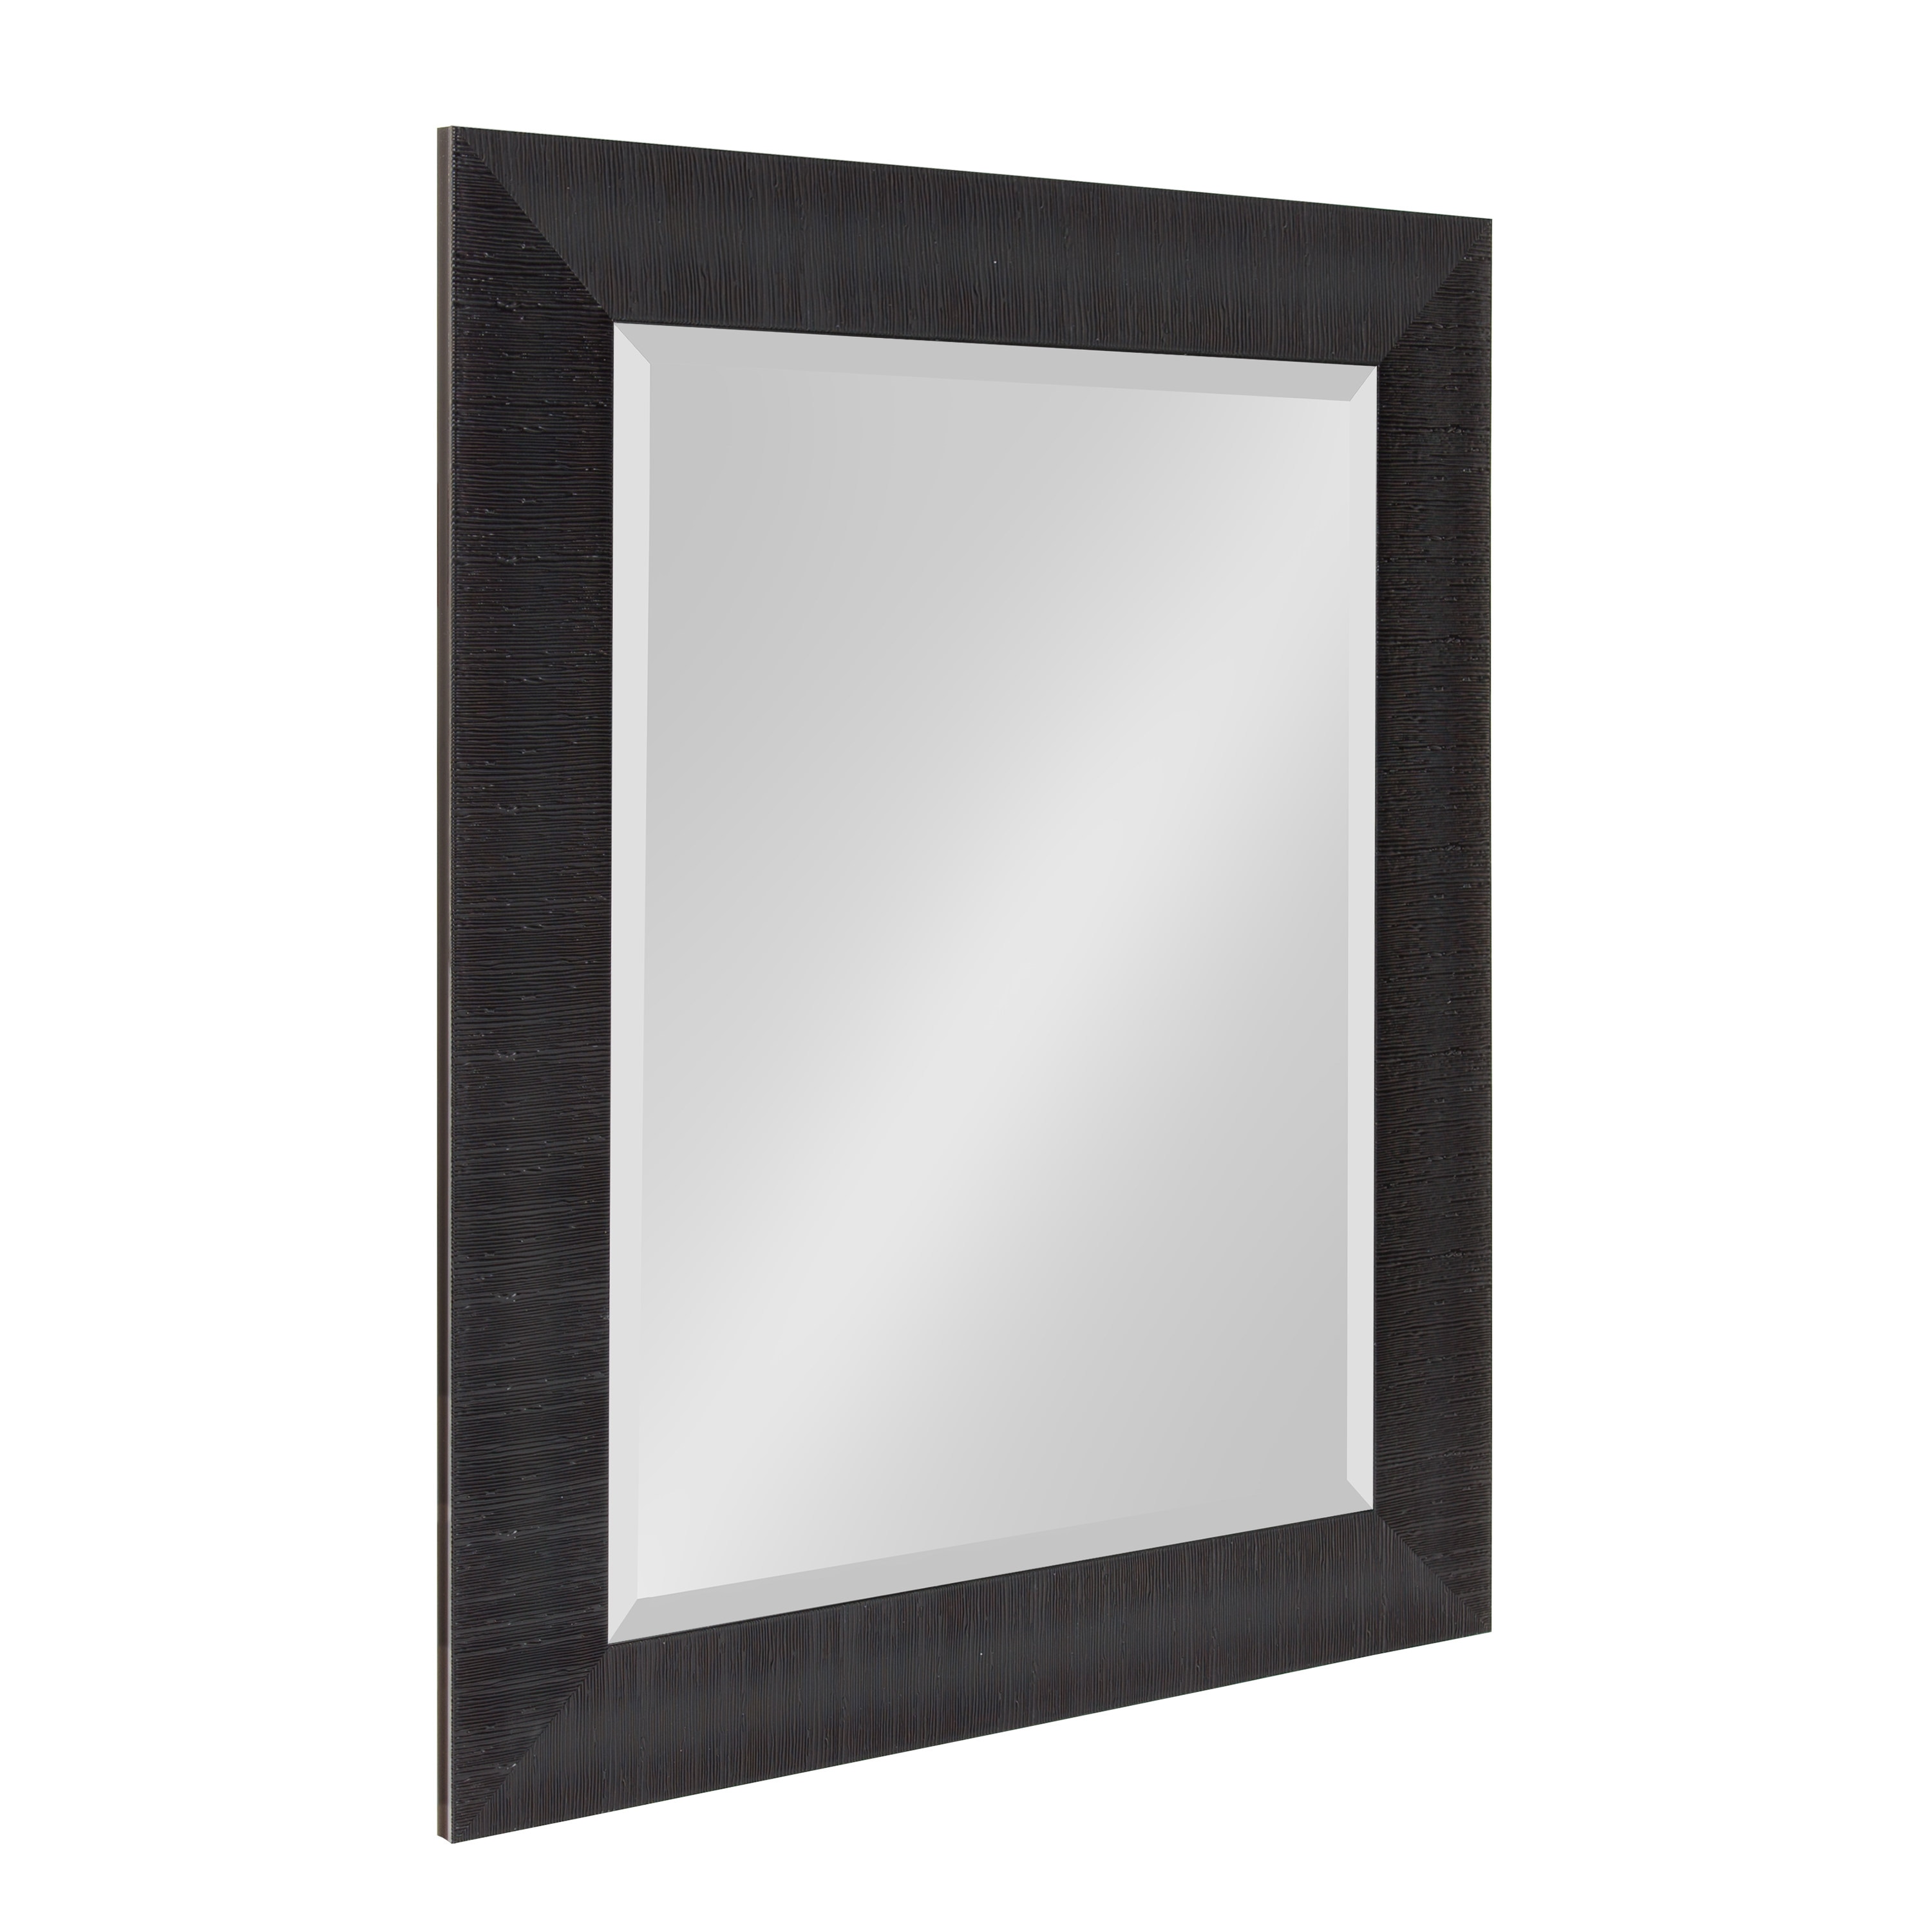 Kate and Laurel Reyna 23.75-in W x 29.75-in H Black Framed Wall Mirror ...